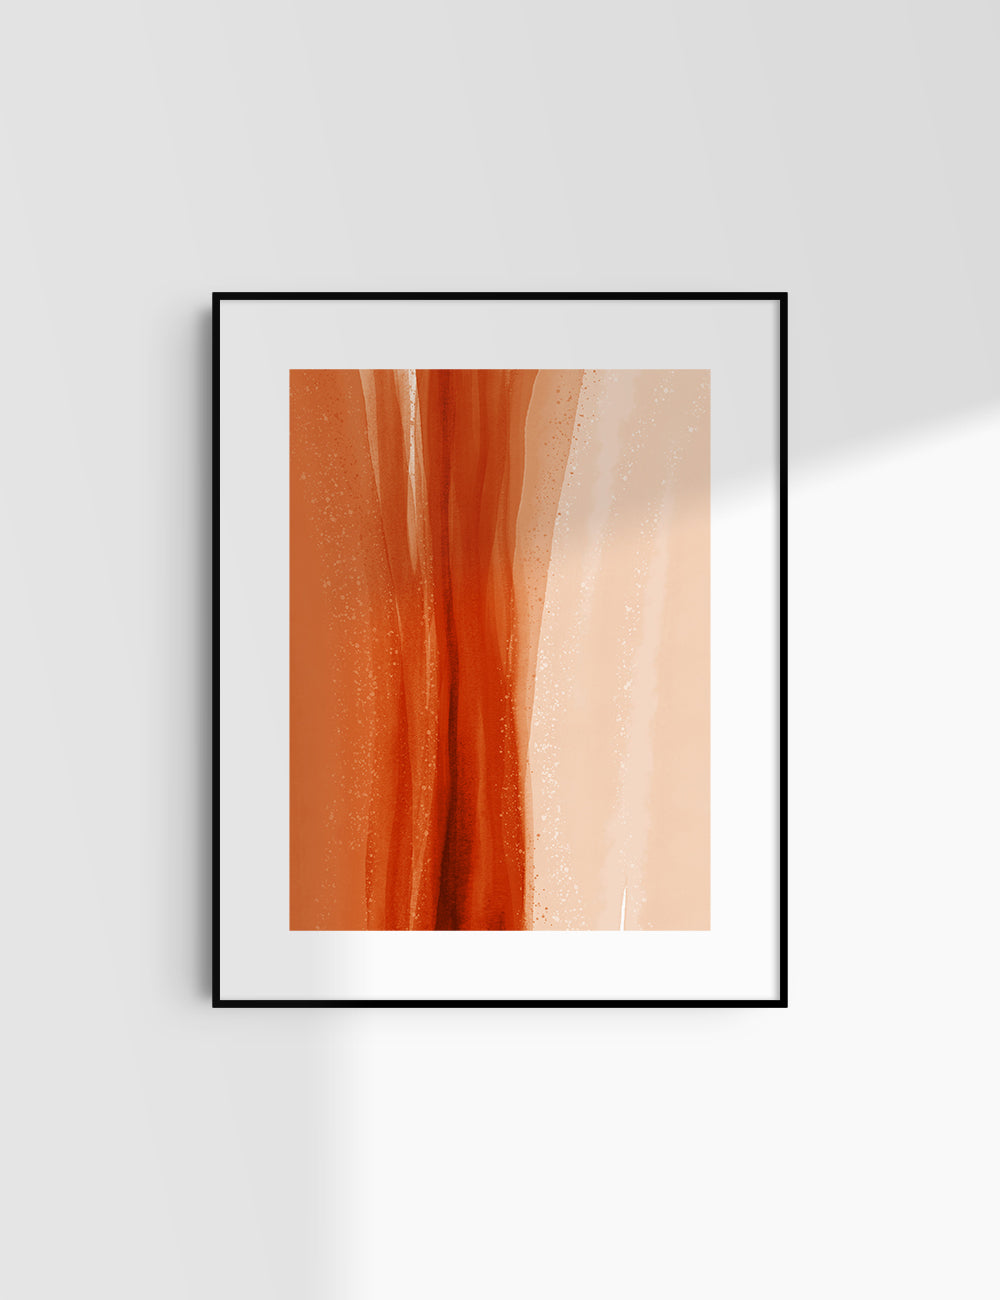 WATERCOLOR ABSTRACT. Burnt Orange Aesthetic. Abstract Watercolor Painting. Printable Wall Art. - PAPER MOON Art & Design